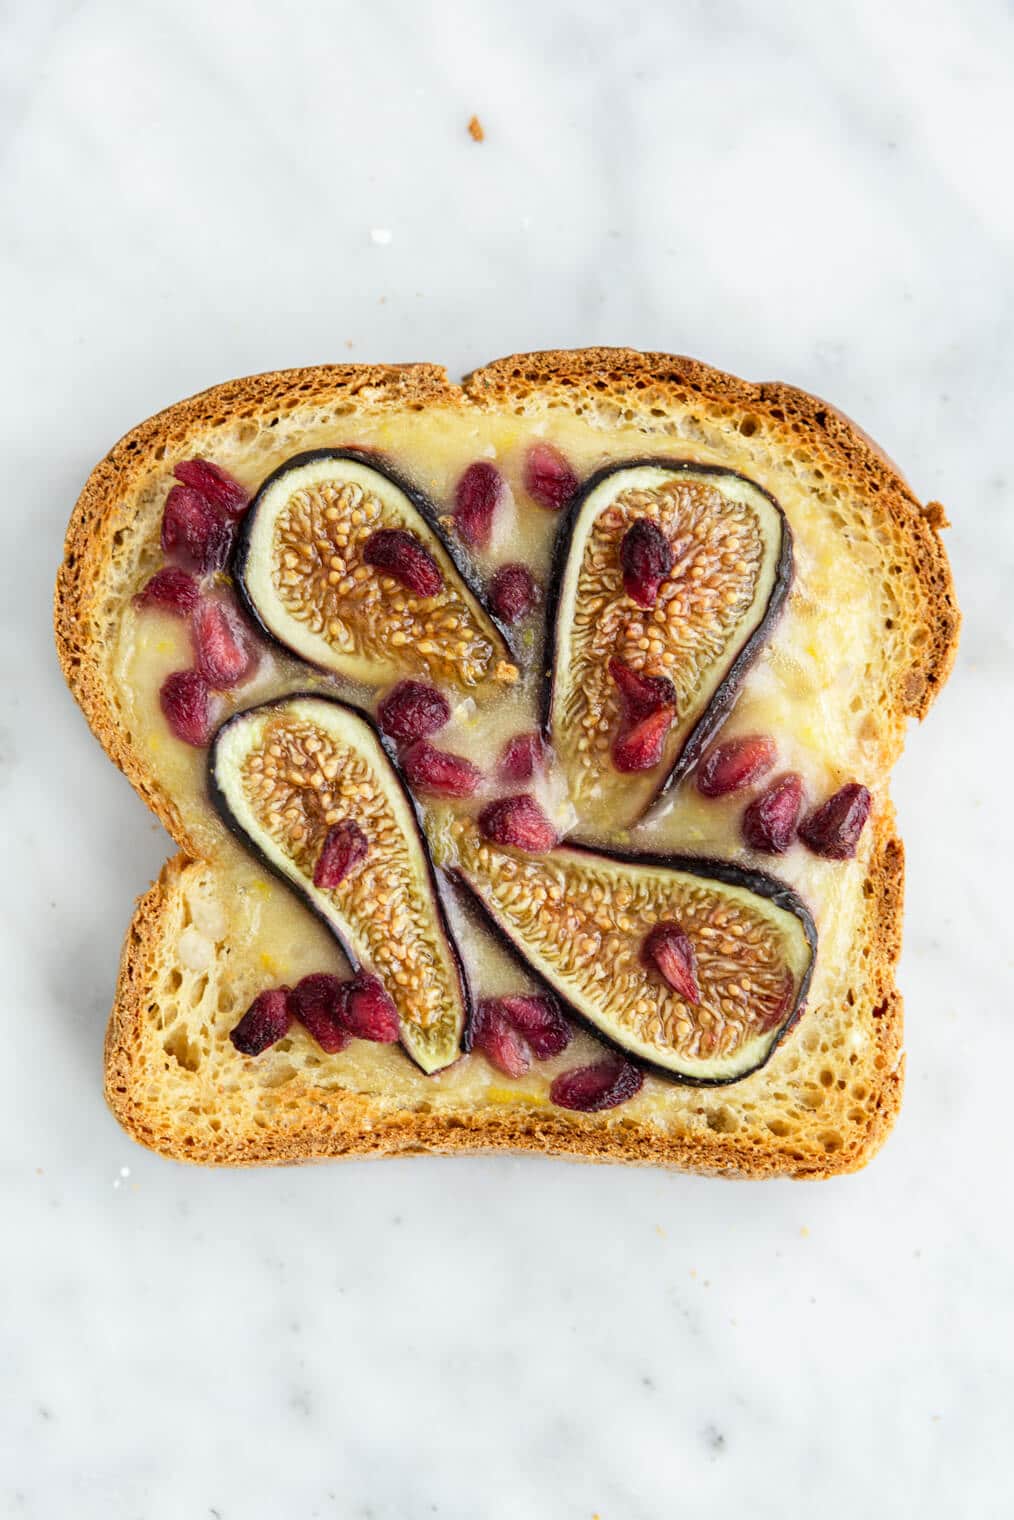 Pomegranate and fig yogurt toast on a grey and white marble background.